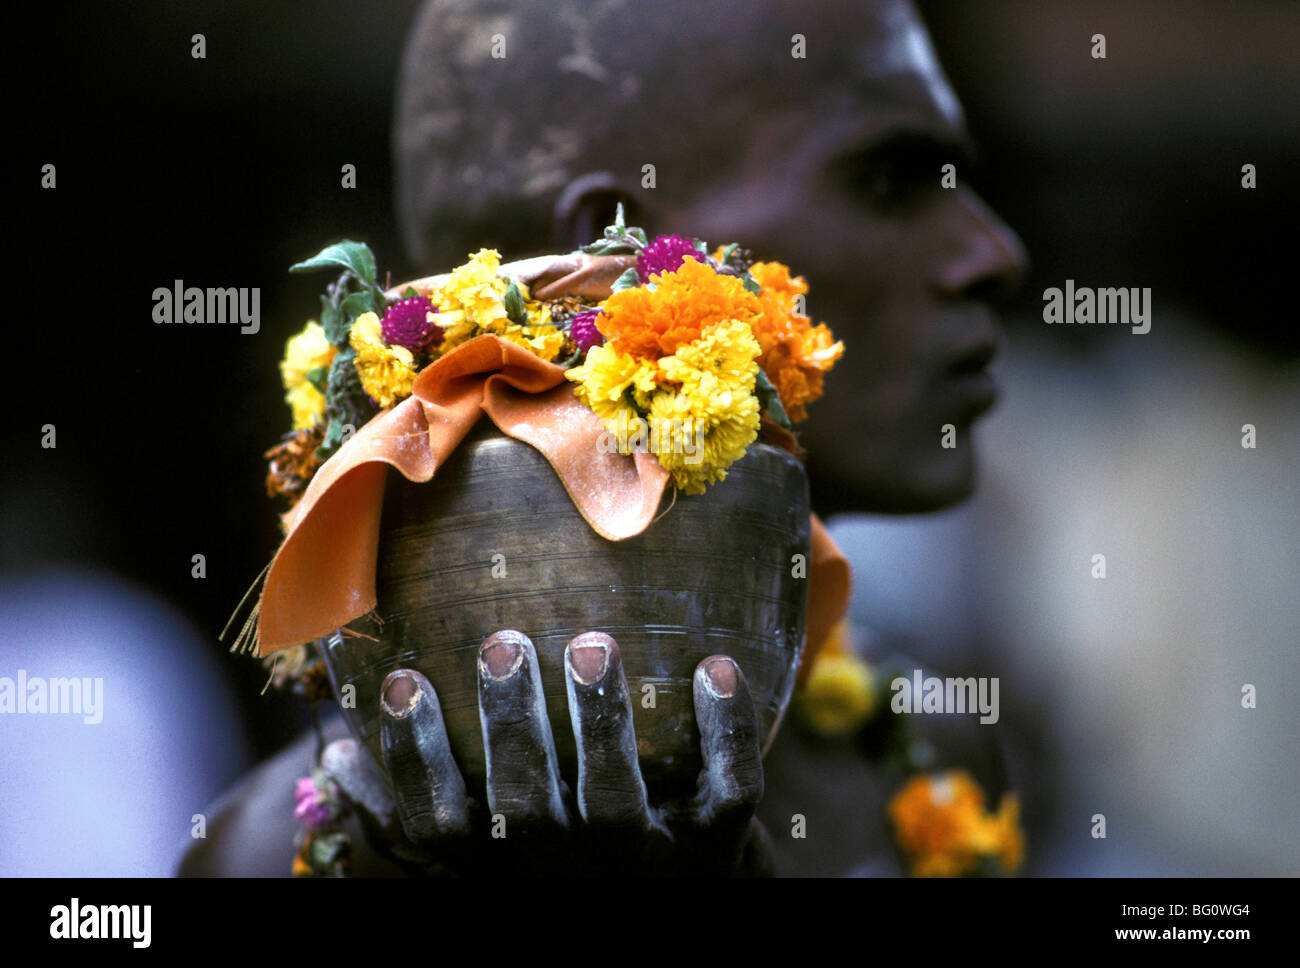 A pilgrim/devotee brings an offering to the Palani Murugan Temple and is taking part in the Thaipusam festival to honor Lord Subramaniam (also known as Lord Muruga), son of Shiva. Thousands of Hindus like this man come to seek penance and absolution for past sins and show gratitude to God for blessings during the year Stock Photo